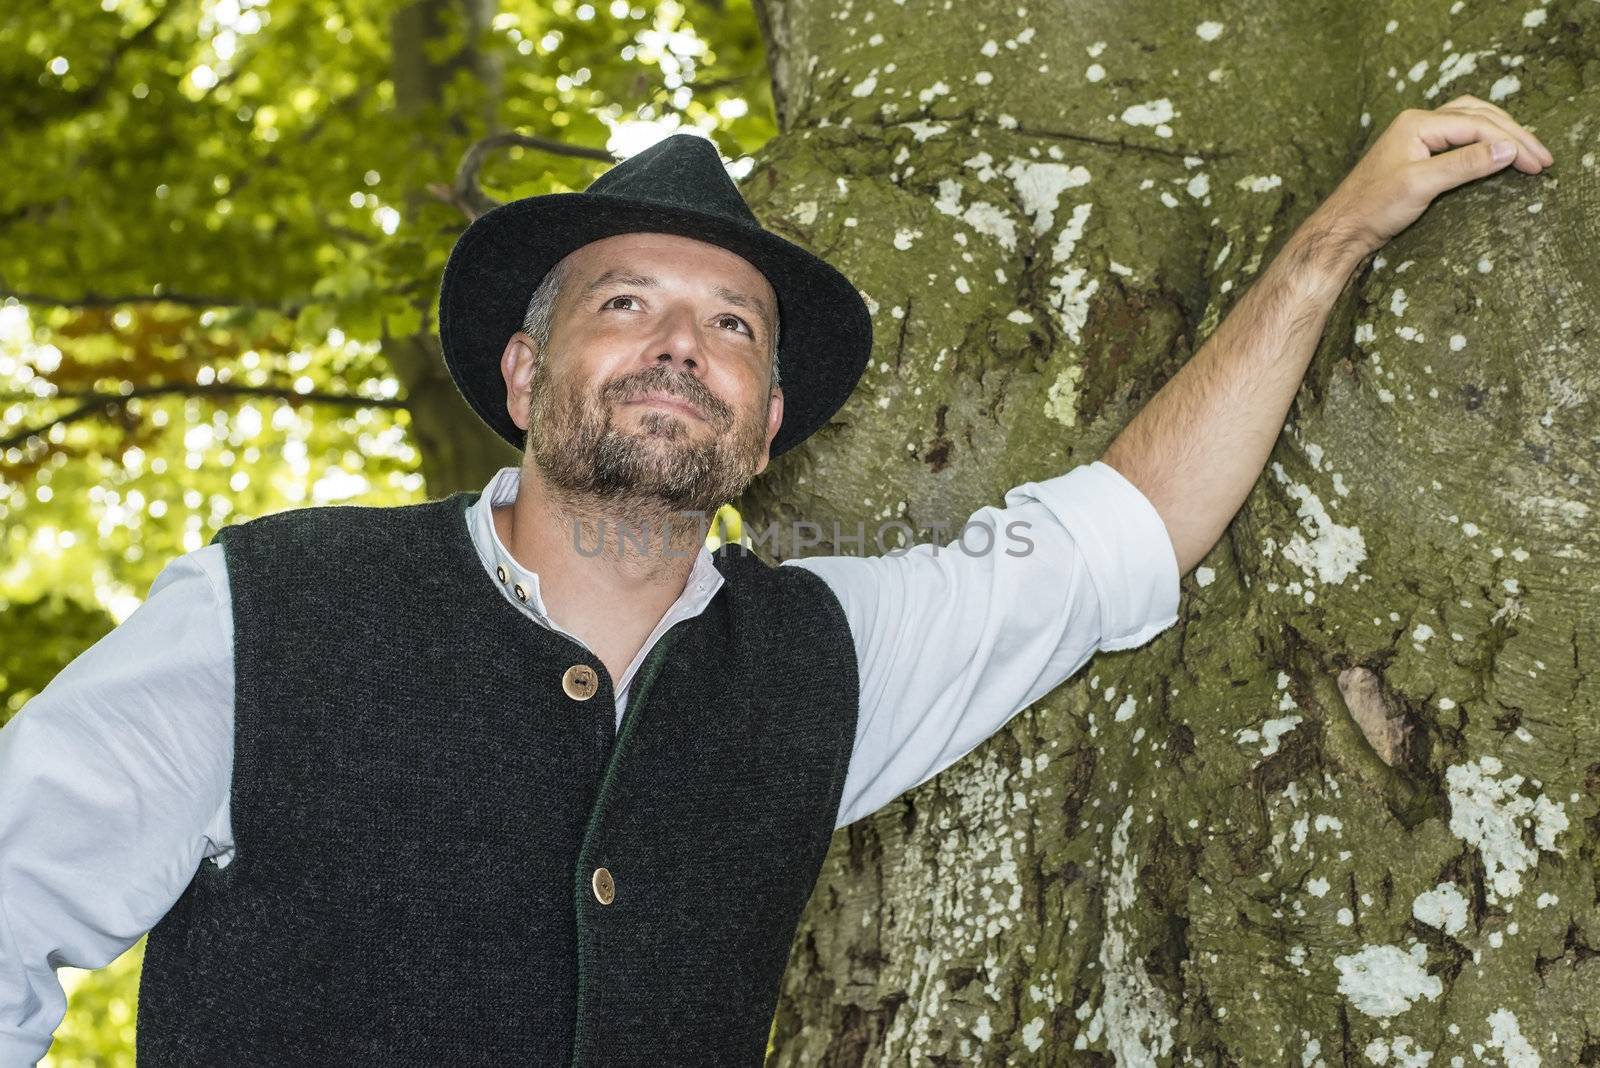 Man with Bavarian tradition standing in a forest